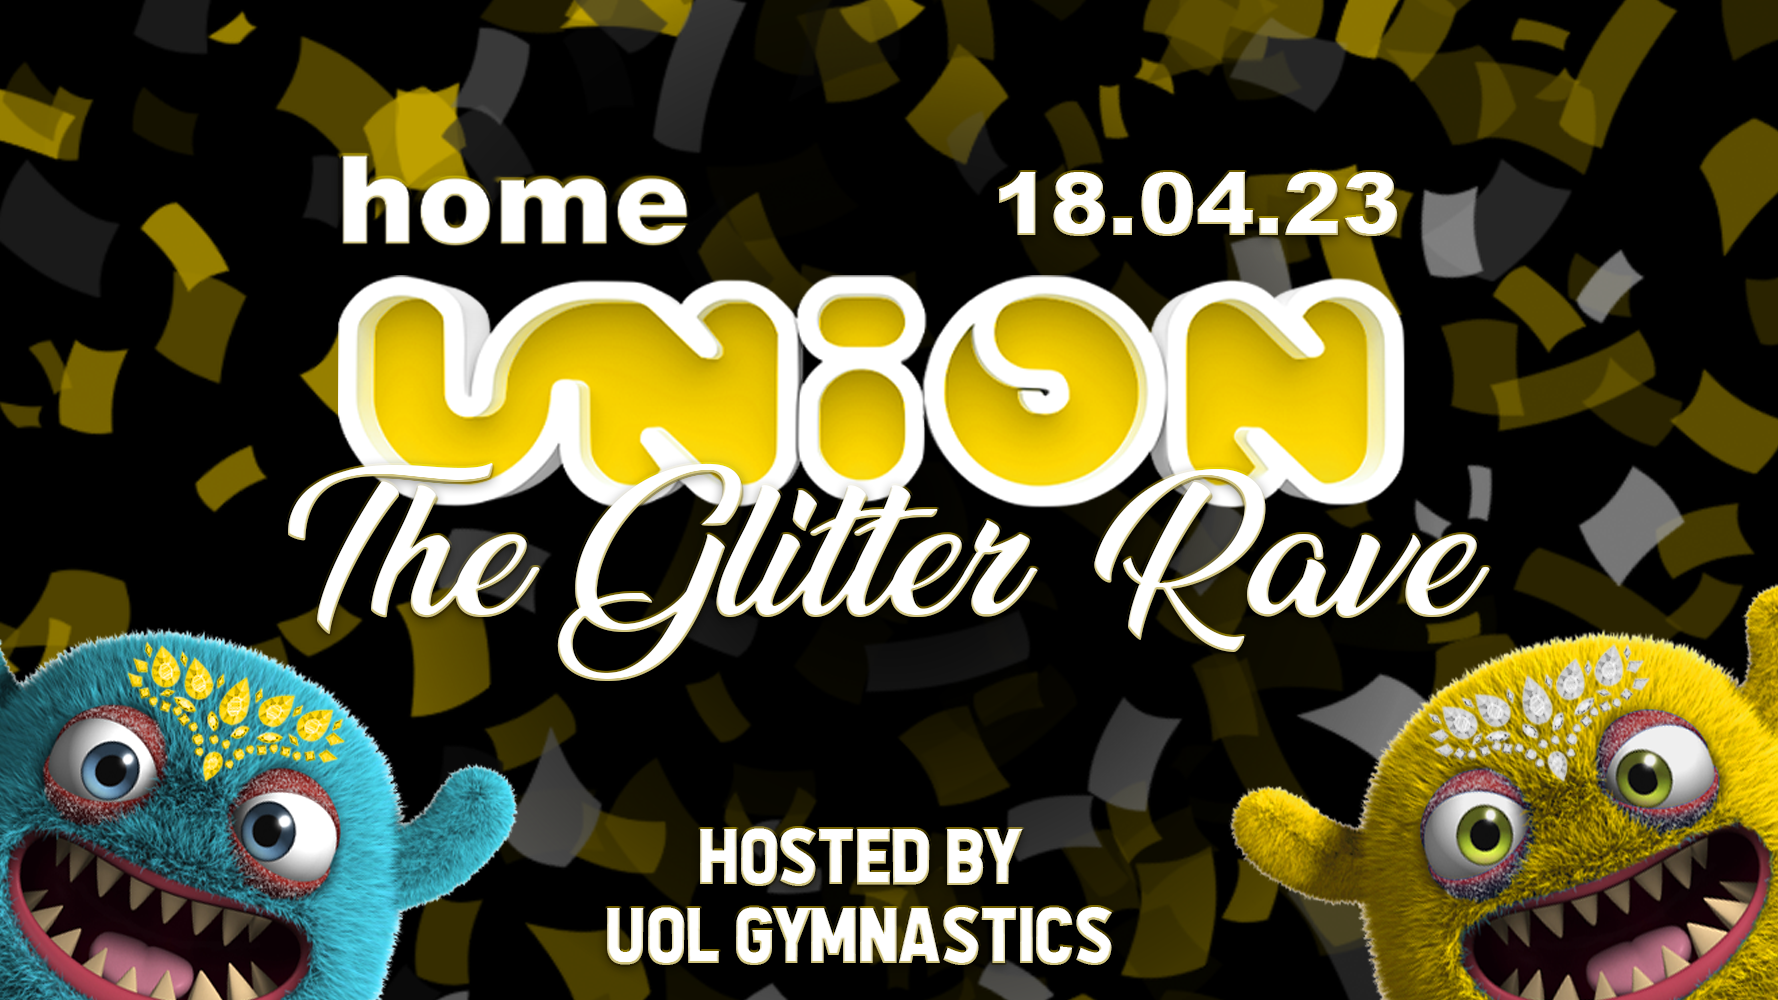 UNION TUESDAY’S AT HOME | THE GLITTER RAVE!